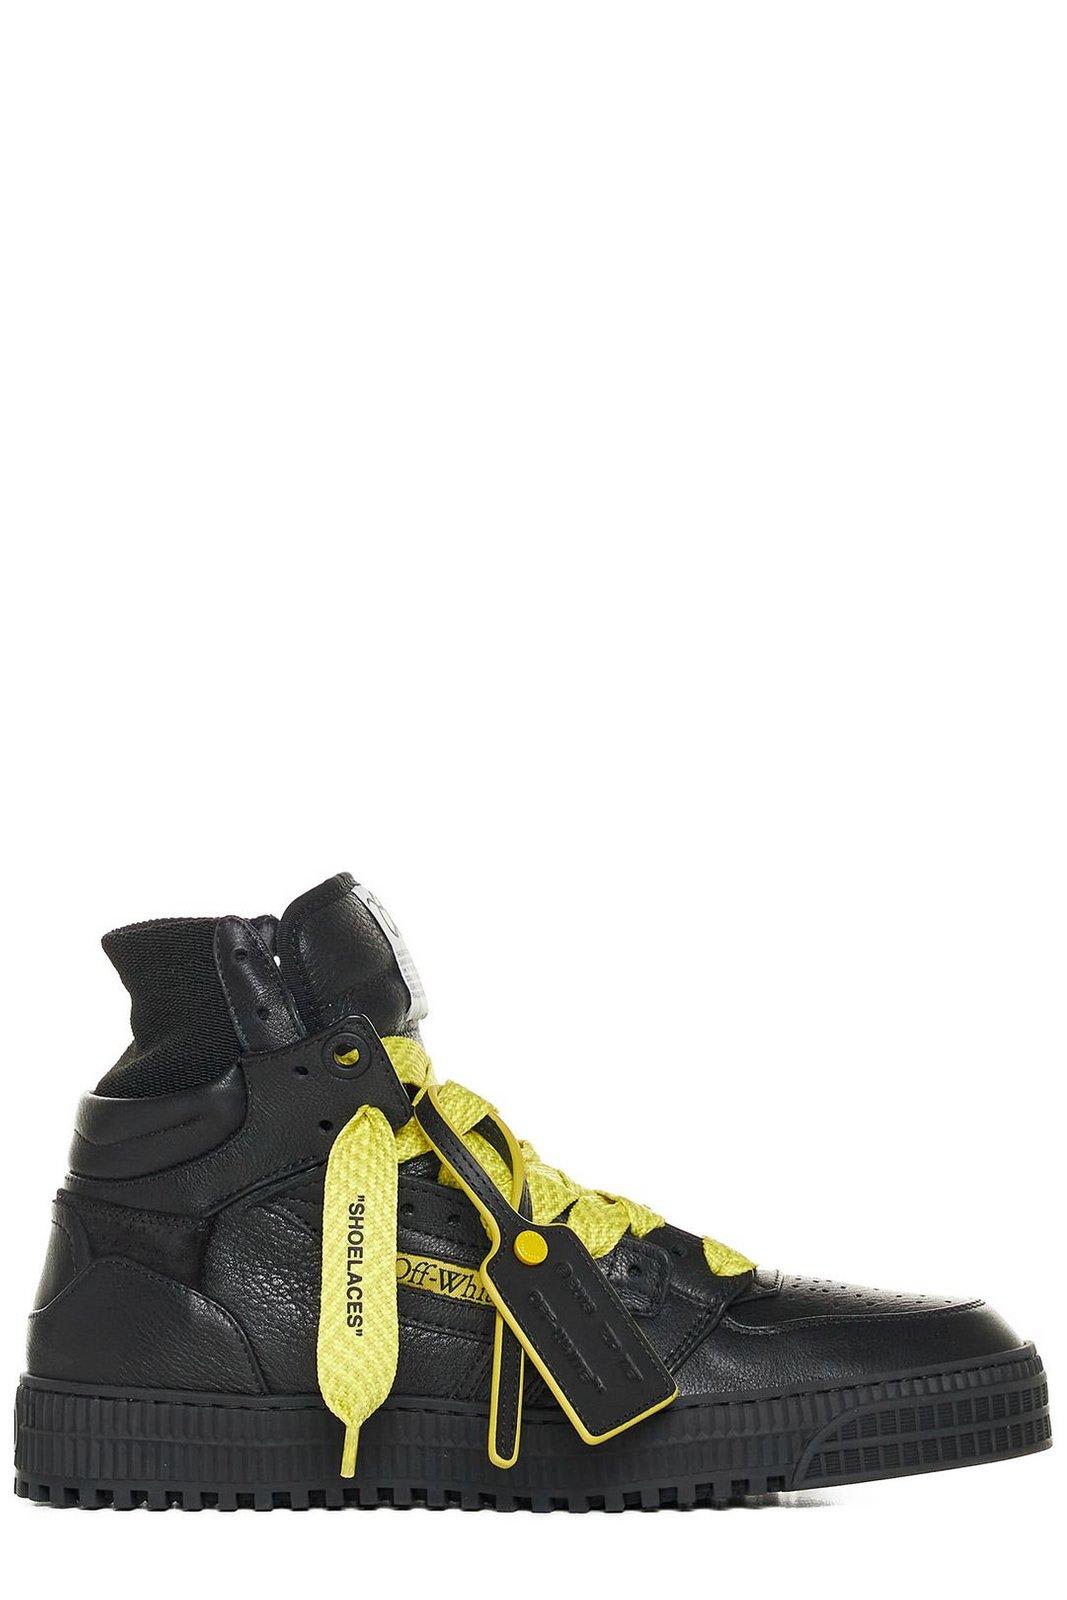 OFF-WHITE 3.0 OFF COURT LACE-UP SNEAKERS